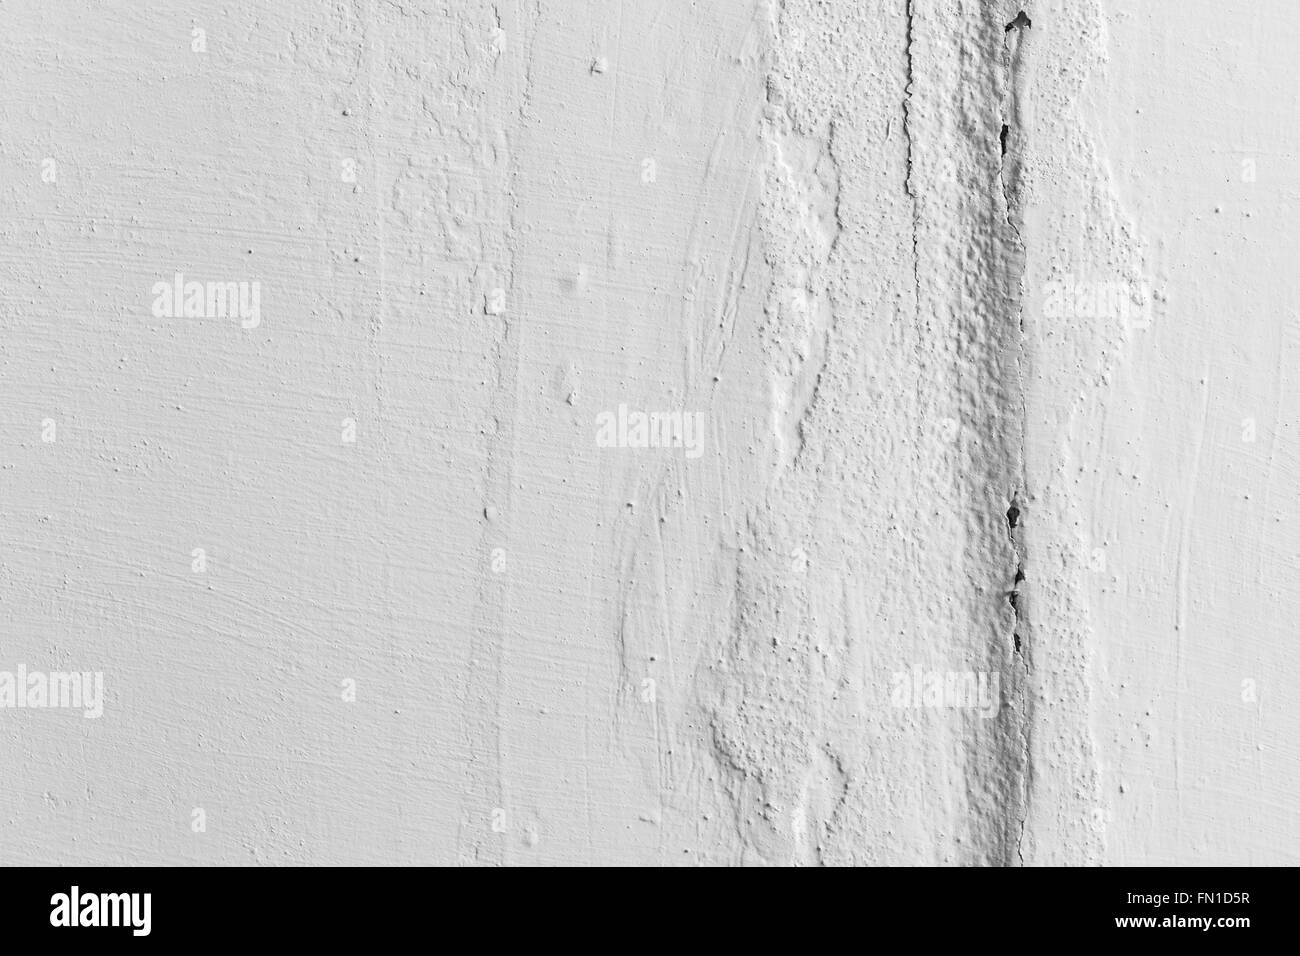 Vertical crack in white painted wall, closeup photo texture Stock Photo